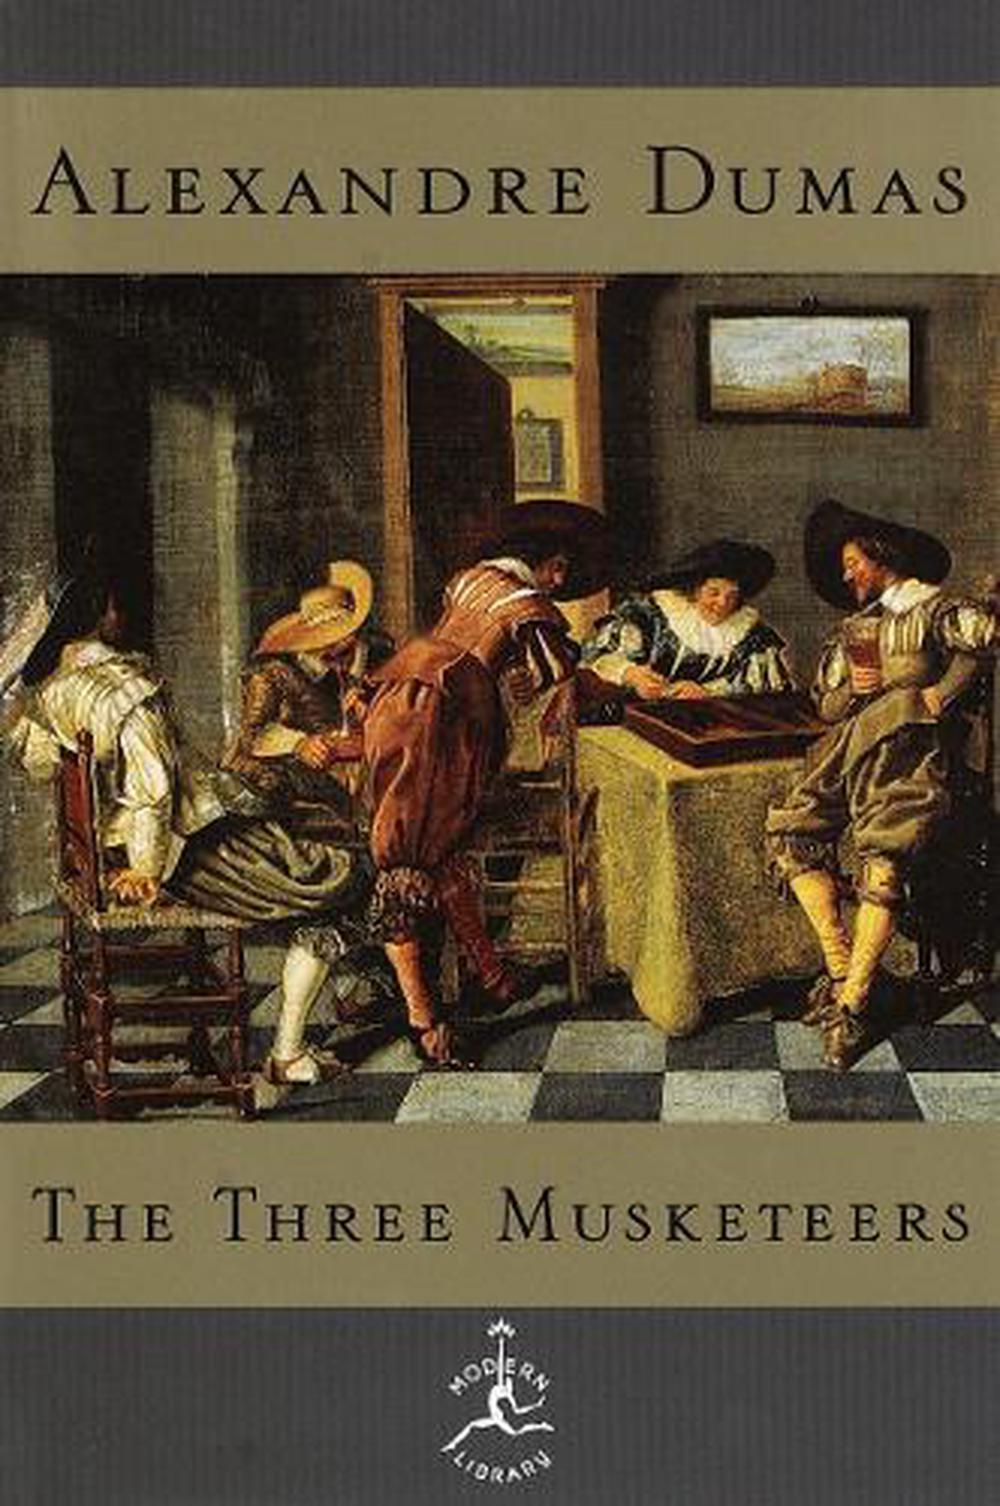 Buy　Alexandre　Nile　The　Musketeers　9780679603320　Dumas,　at　Three　by　online　Hardcover,　The